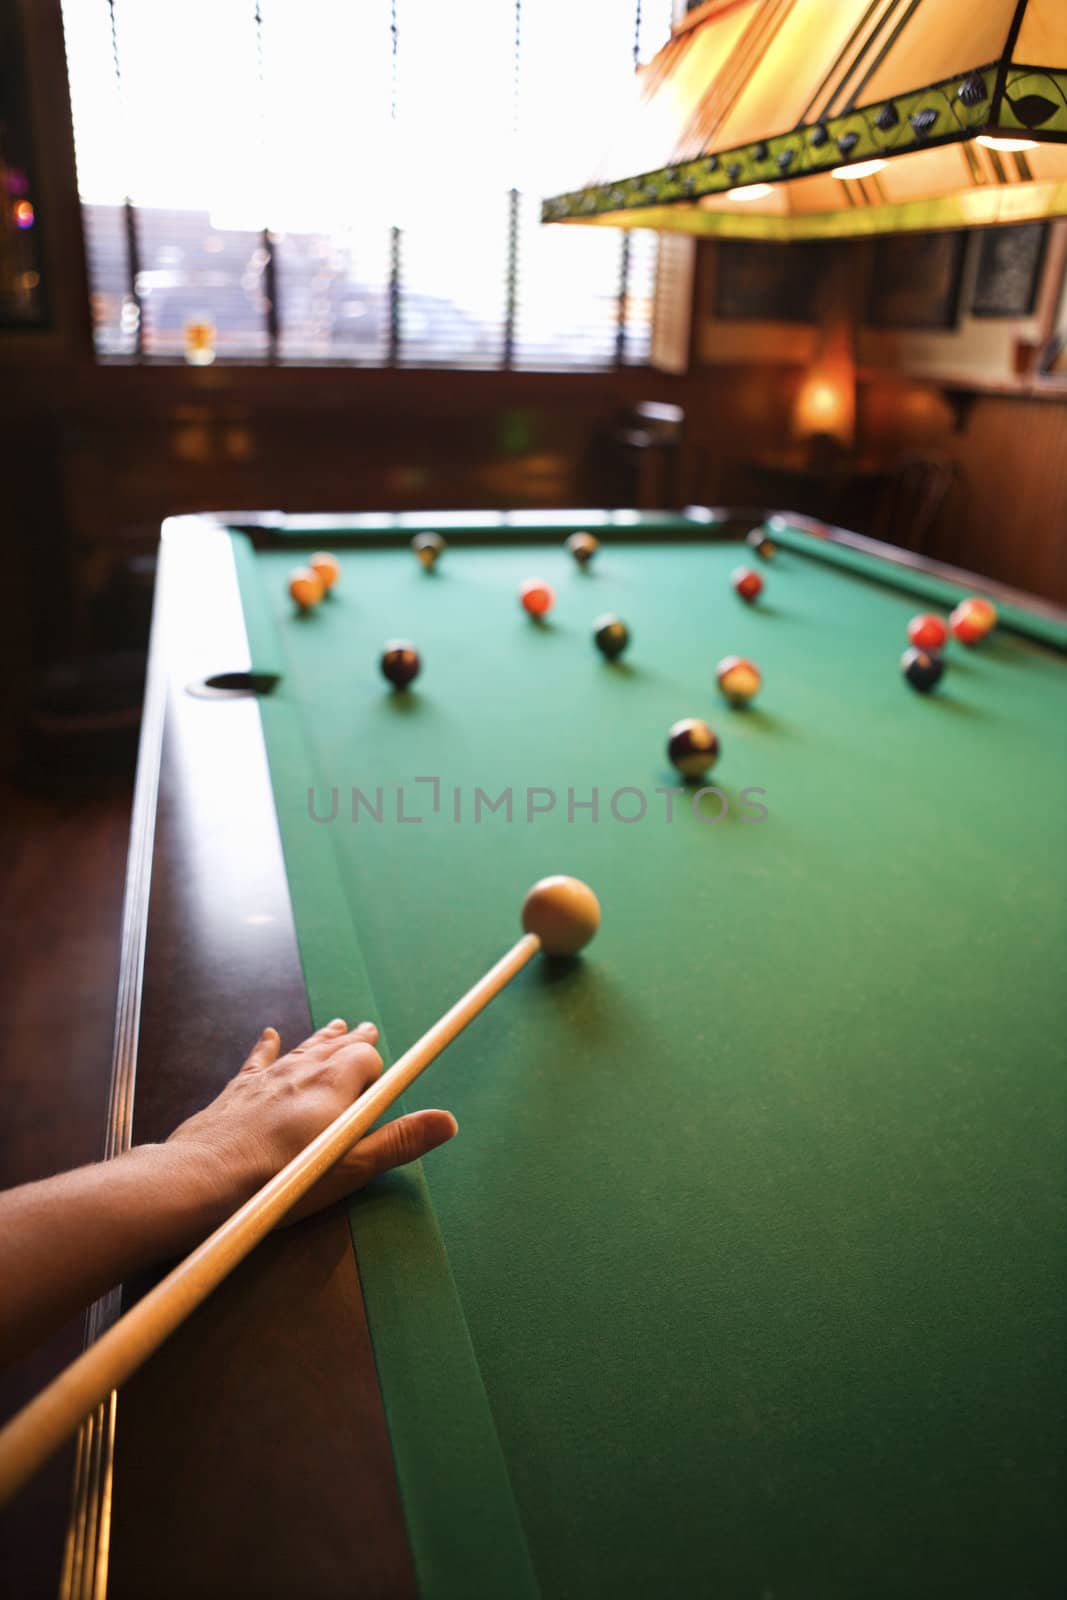 Woman's hand preparing to hit pool ball while playing billiards.